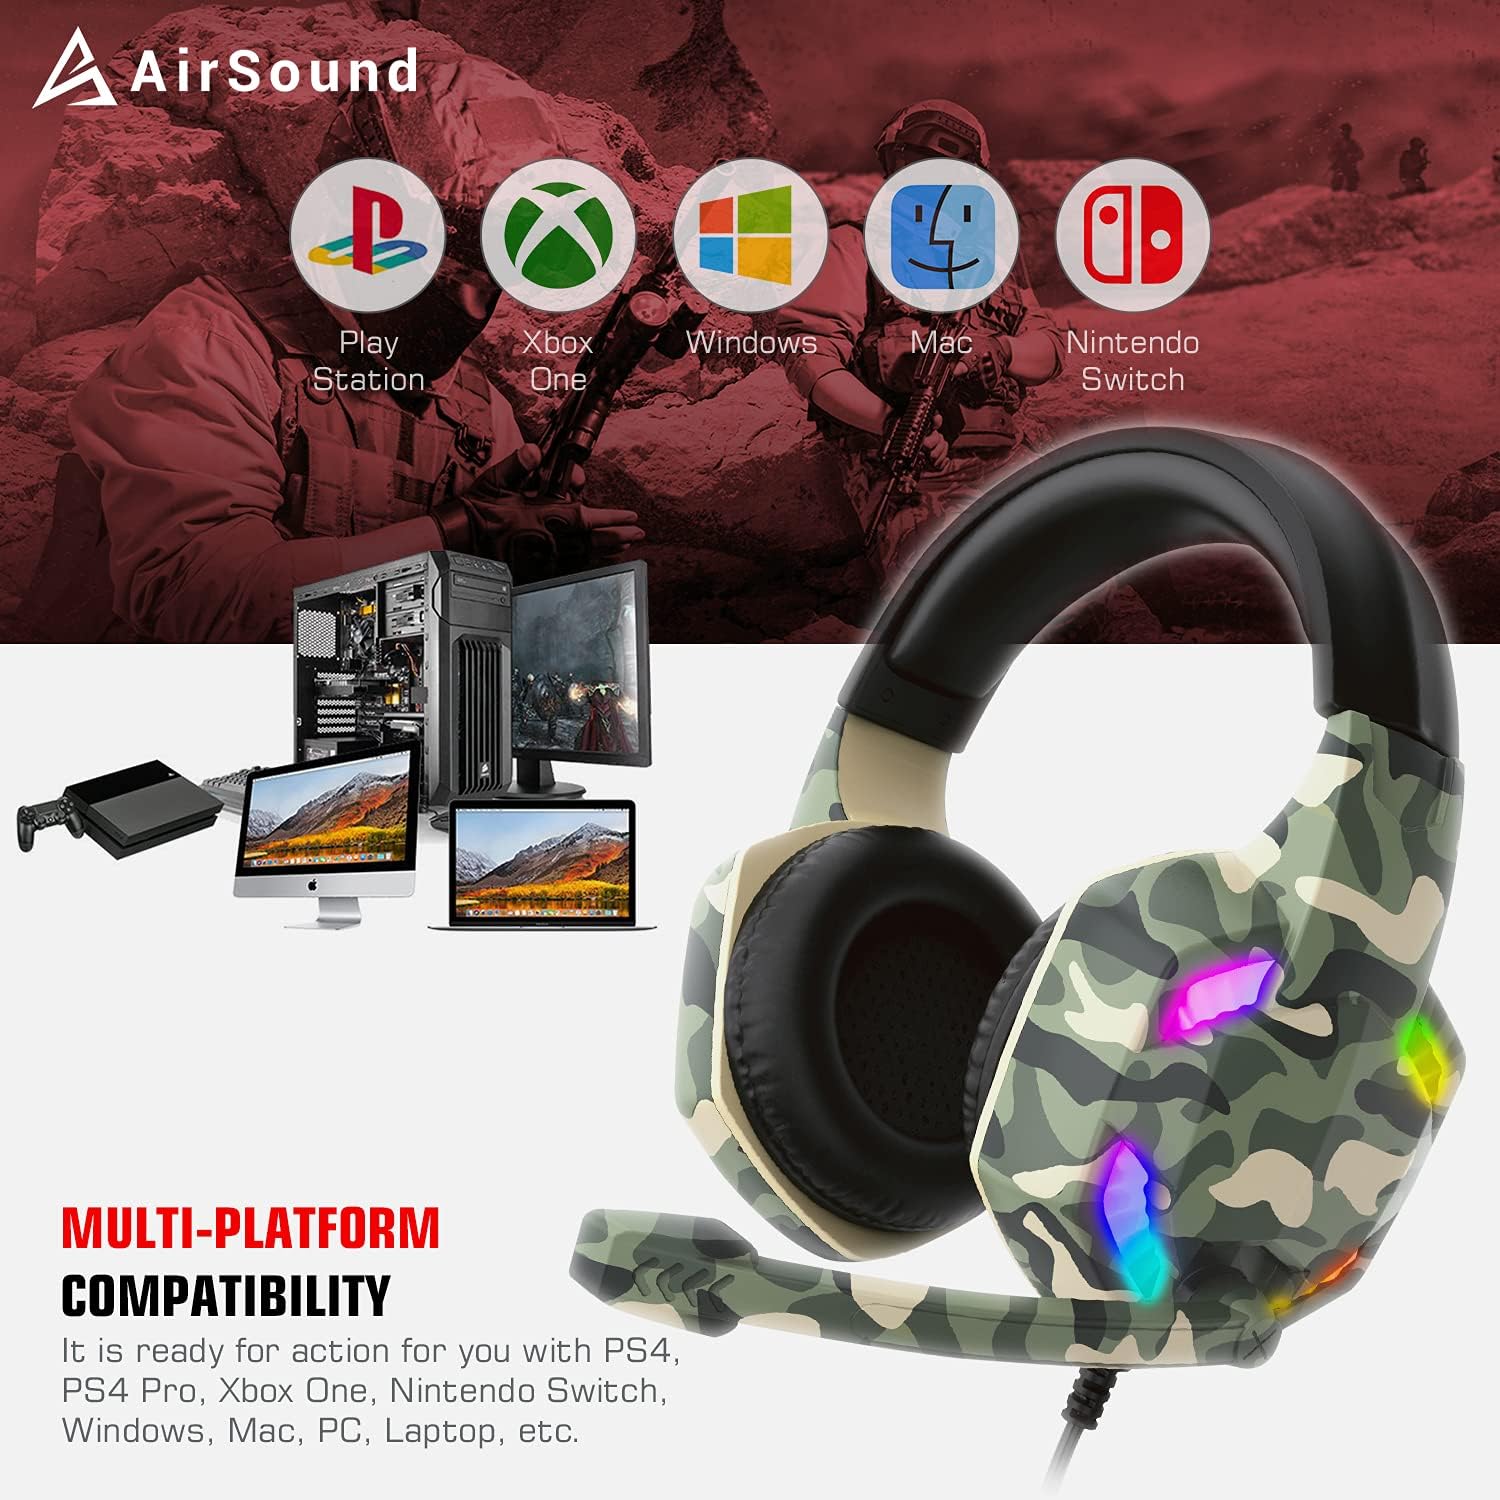 Airsound Alpha-6 Stereo Gaming Headset For Ps4 Pc Xbox One Ps5 Controller, Noise Cancelling Over-Ear Headphones With Mic, Rbg Led, Bass Surround, Soft Memory Earmuffs For Laptop Mac Nintendo Nes Games